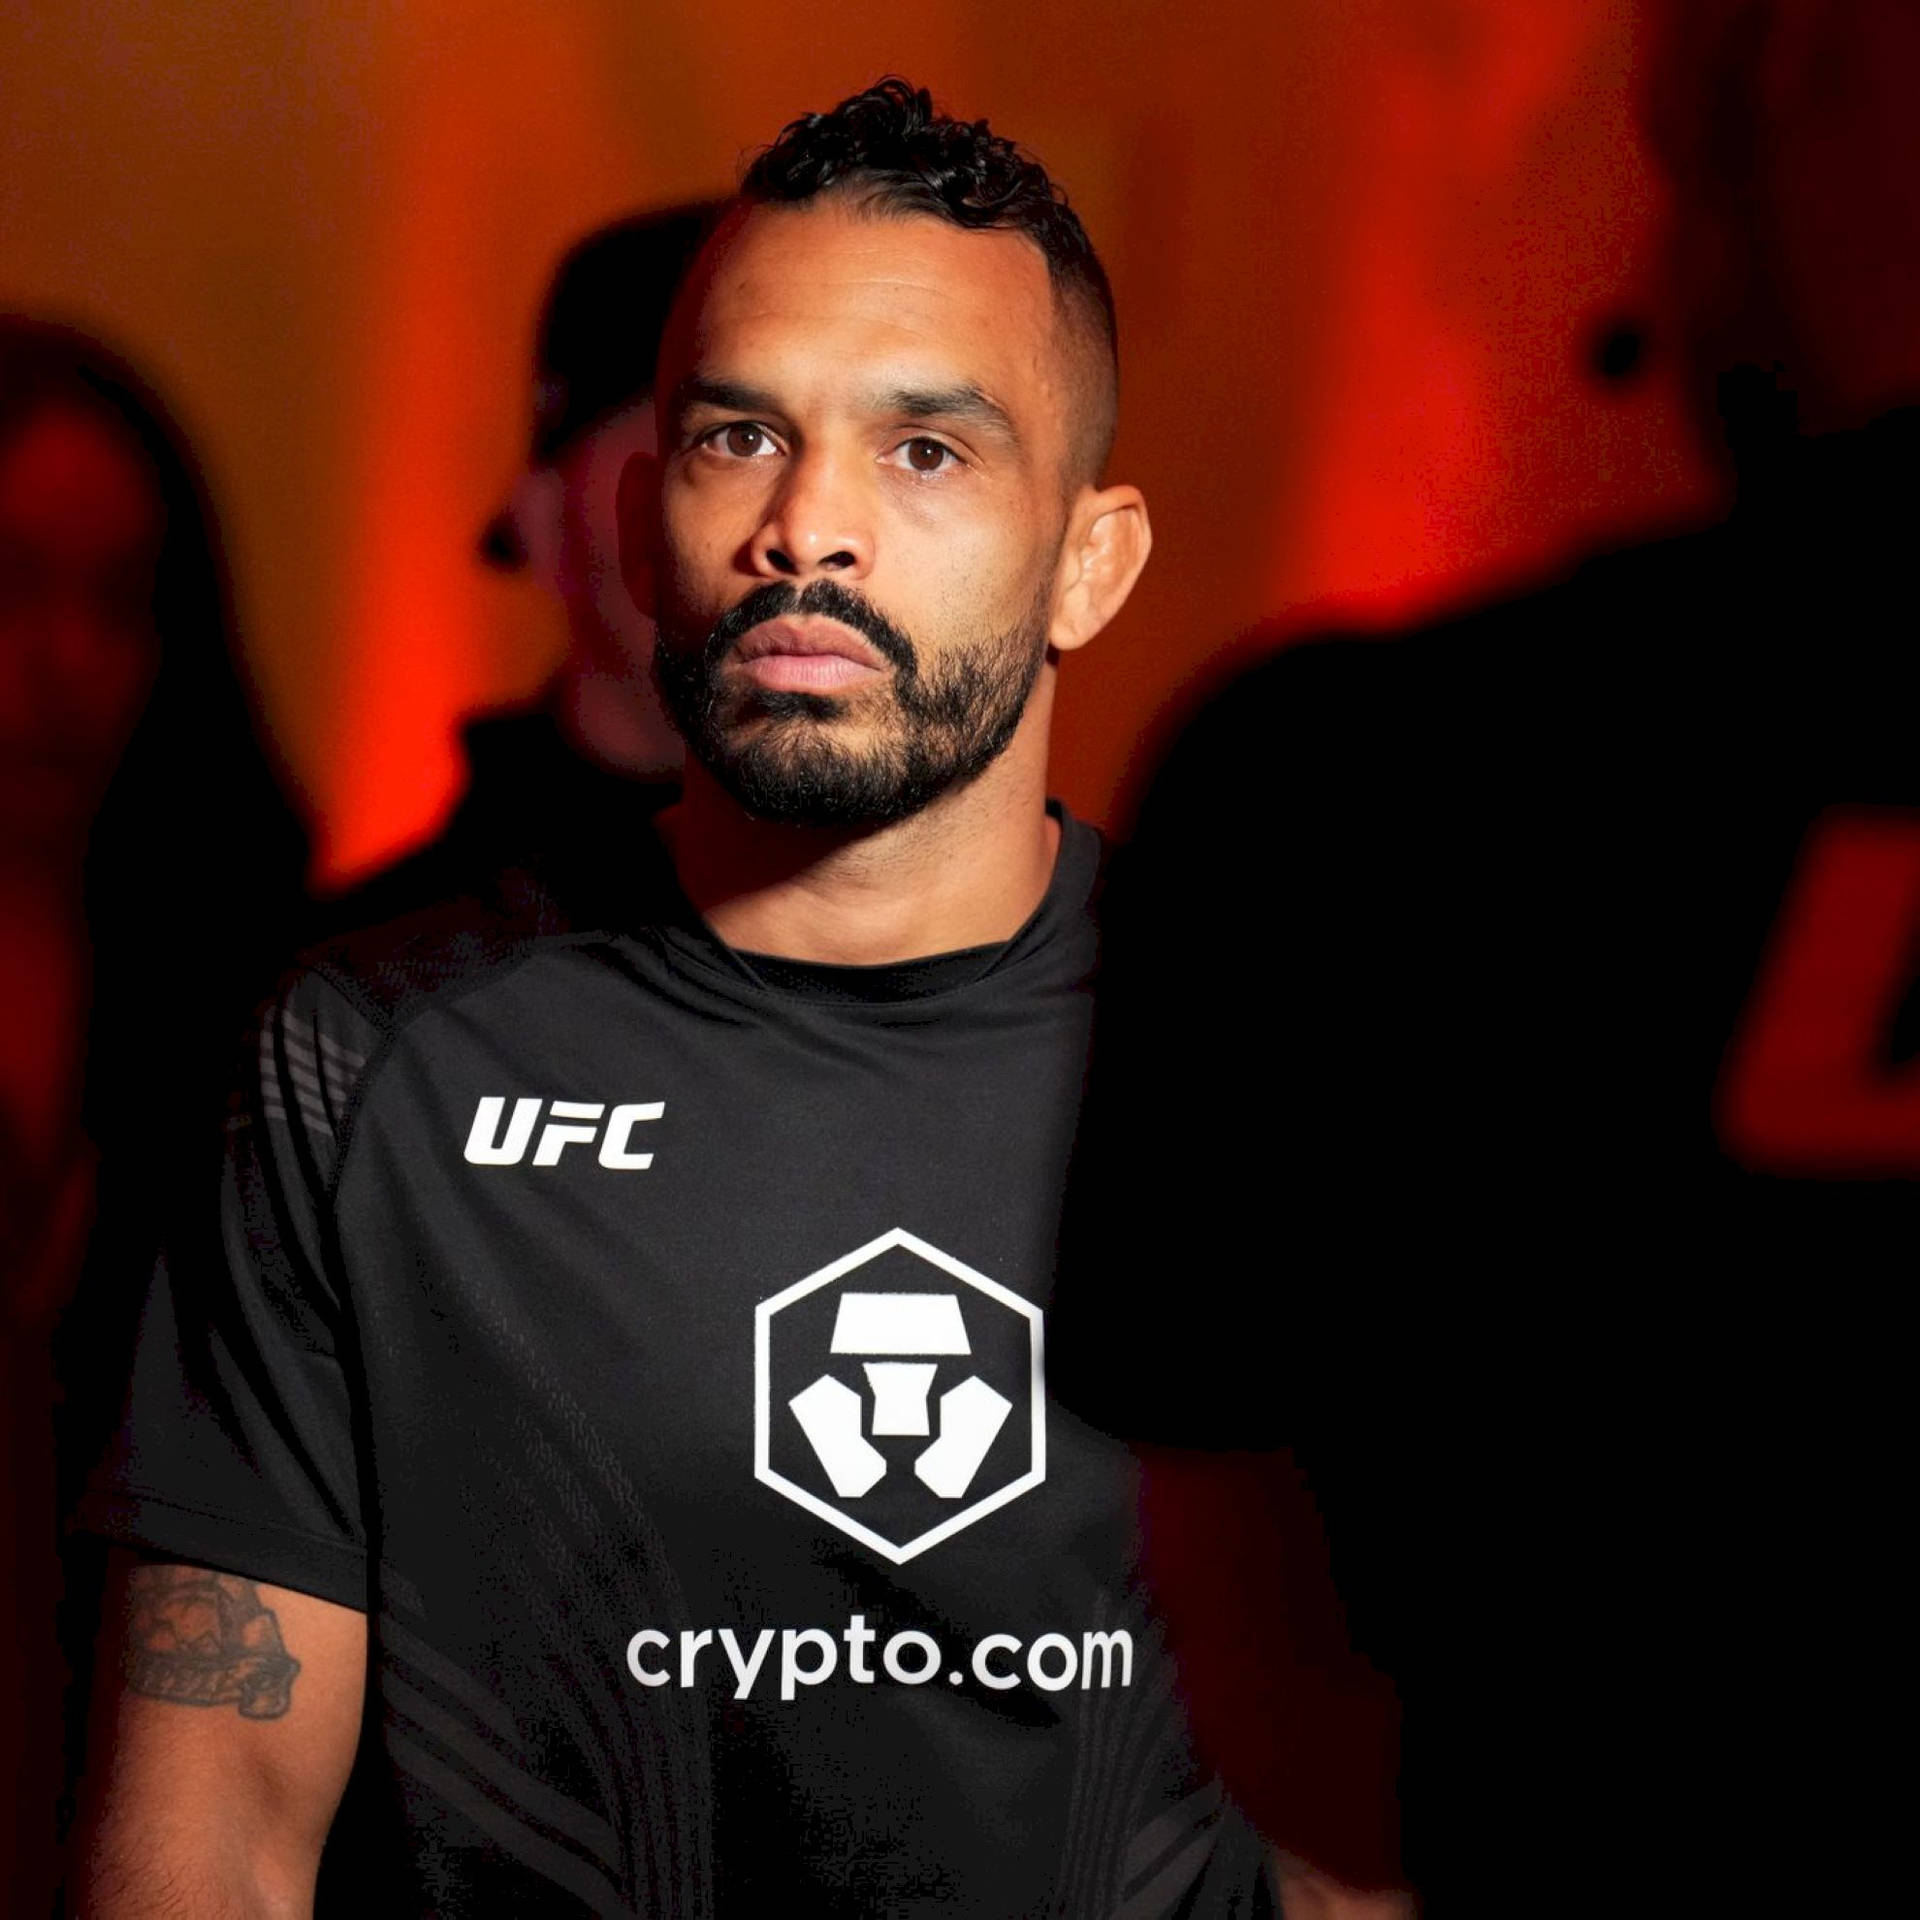 Rob Font, The UFC Star in Black Wallpaper